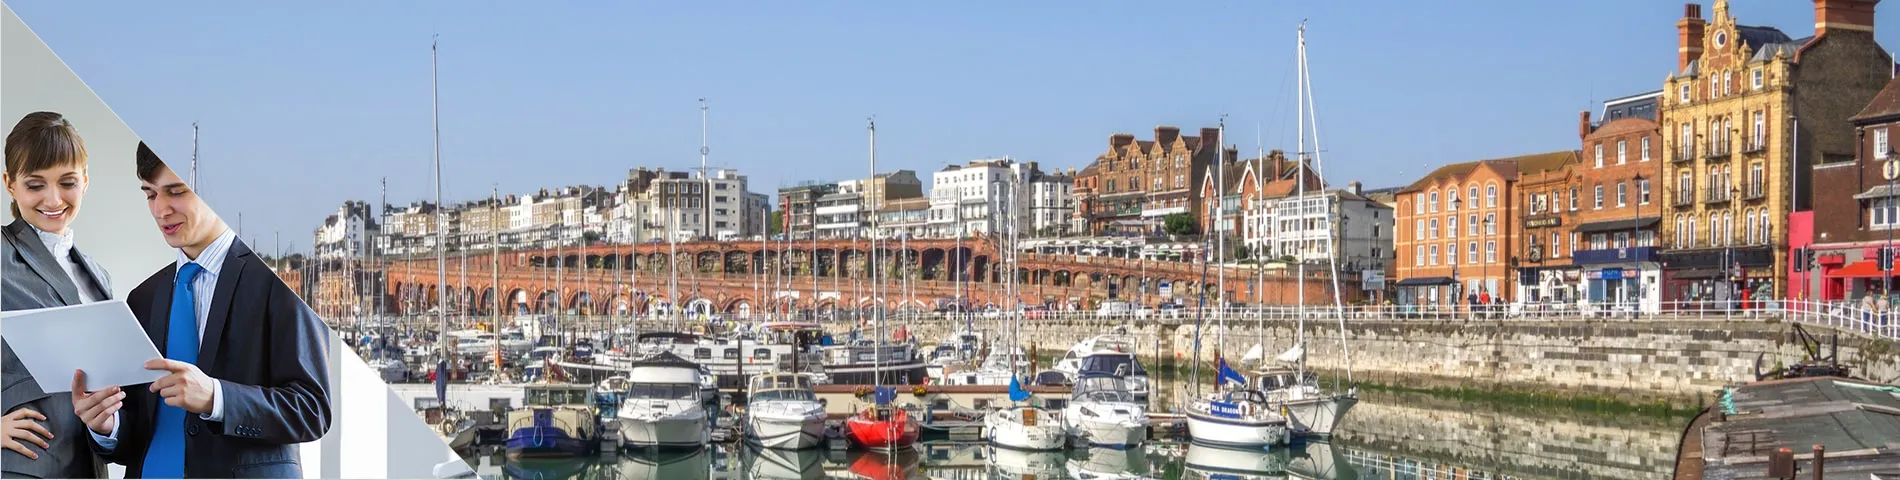 Ramsgate - Individuell businesskurs